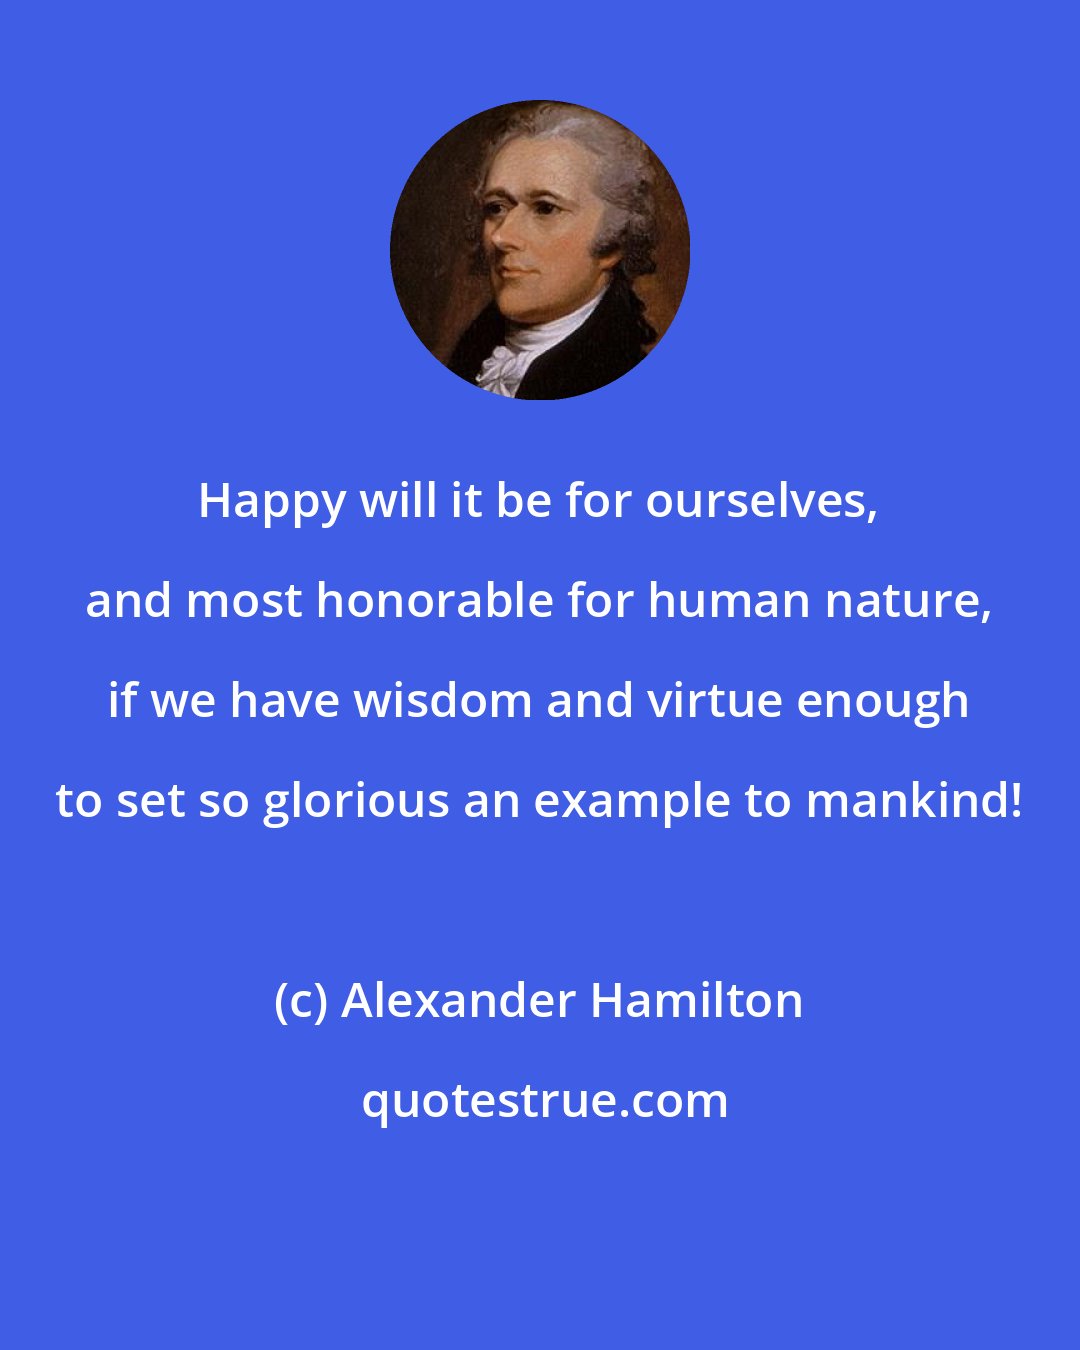 Alexander Hamilton: Happy will it be for ourselves, and most honorable for human nature, if we have wisdom and virtue enough to set so glorious an example to mankind!